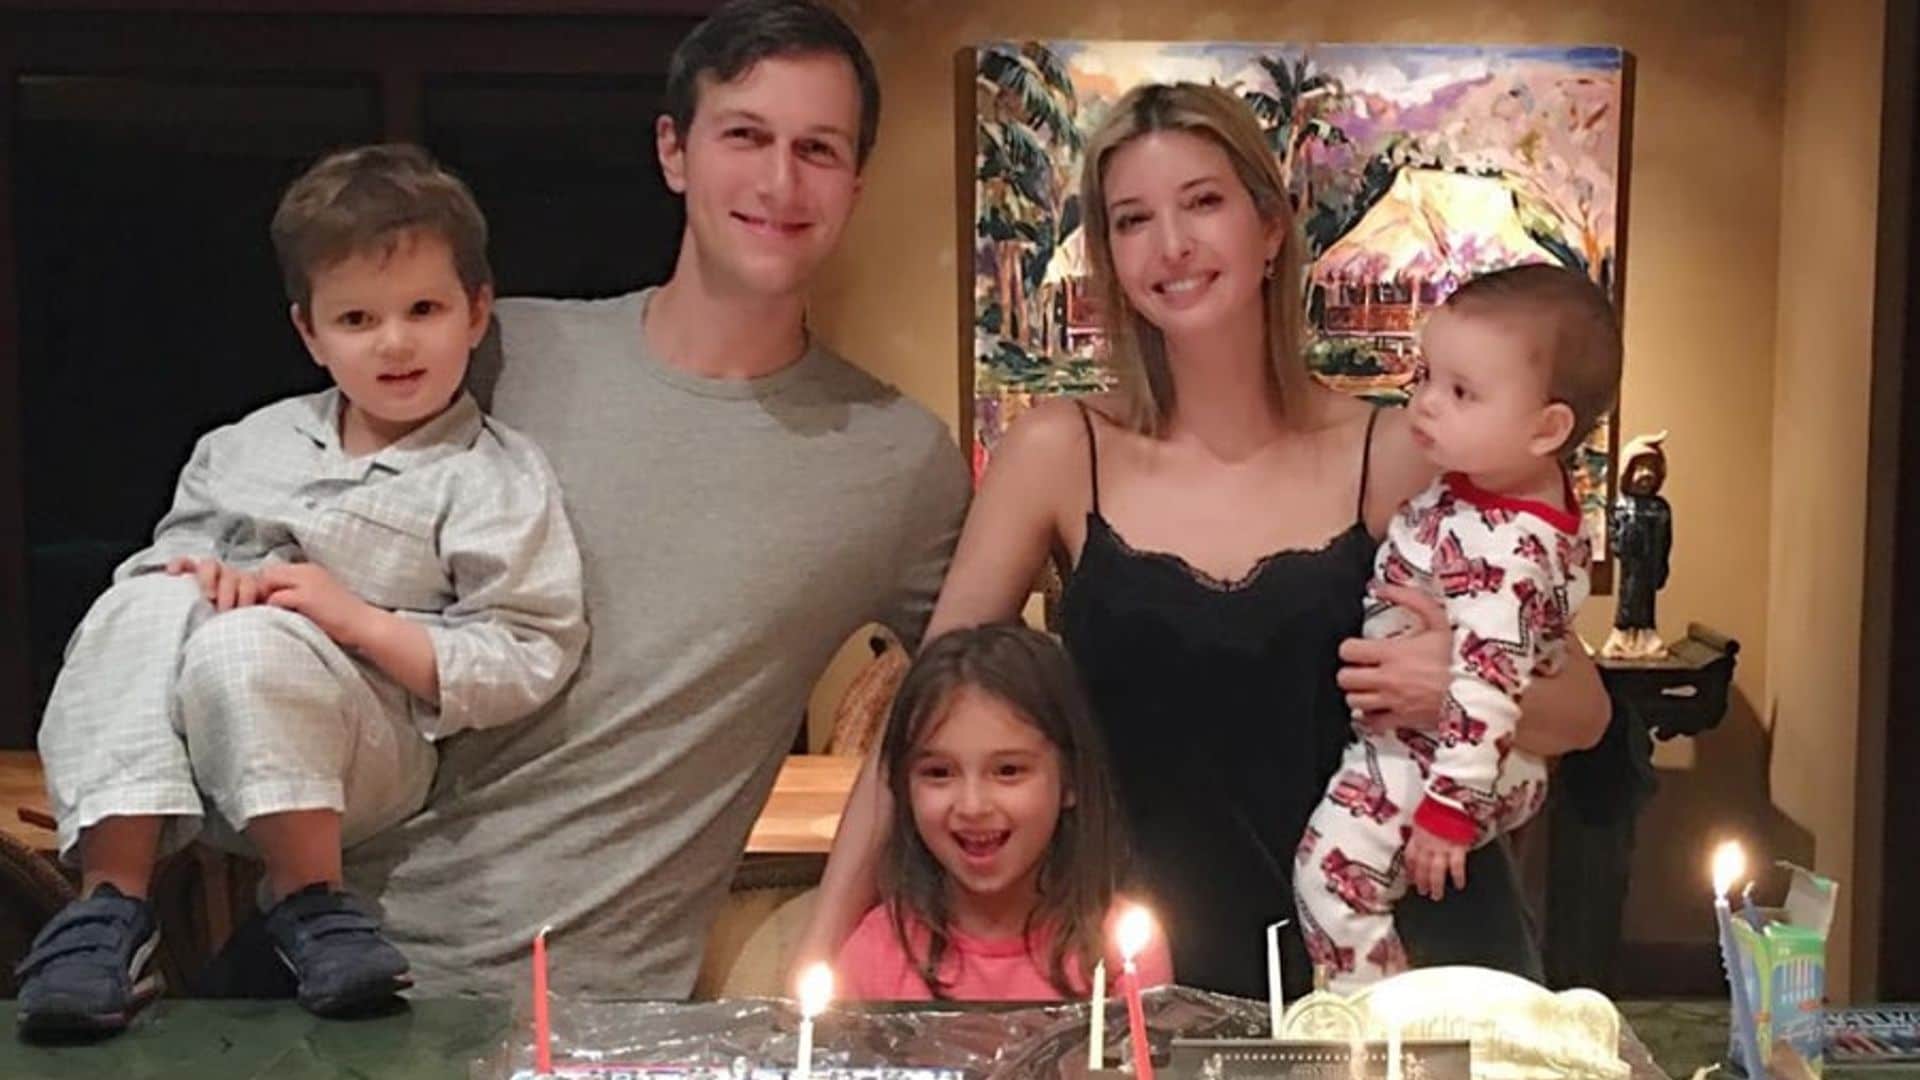 Ivanka said she plans to take time to settle her "three young children into their new home and schools."
Photo: Instagram/@Ivankatrump